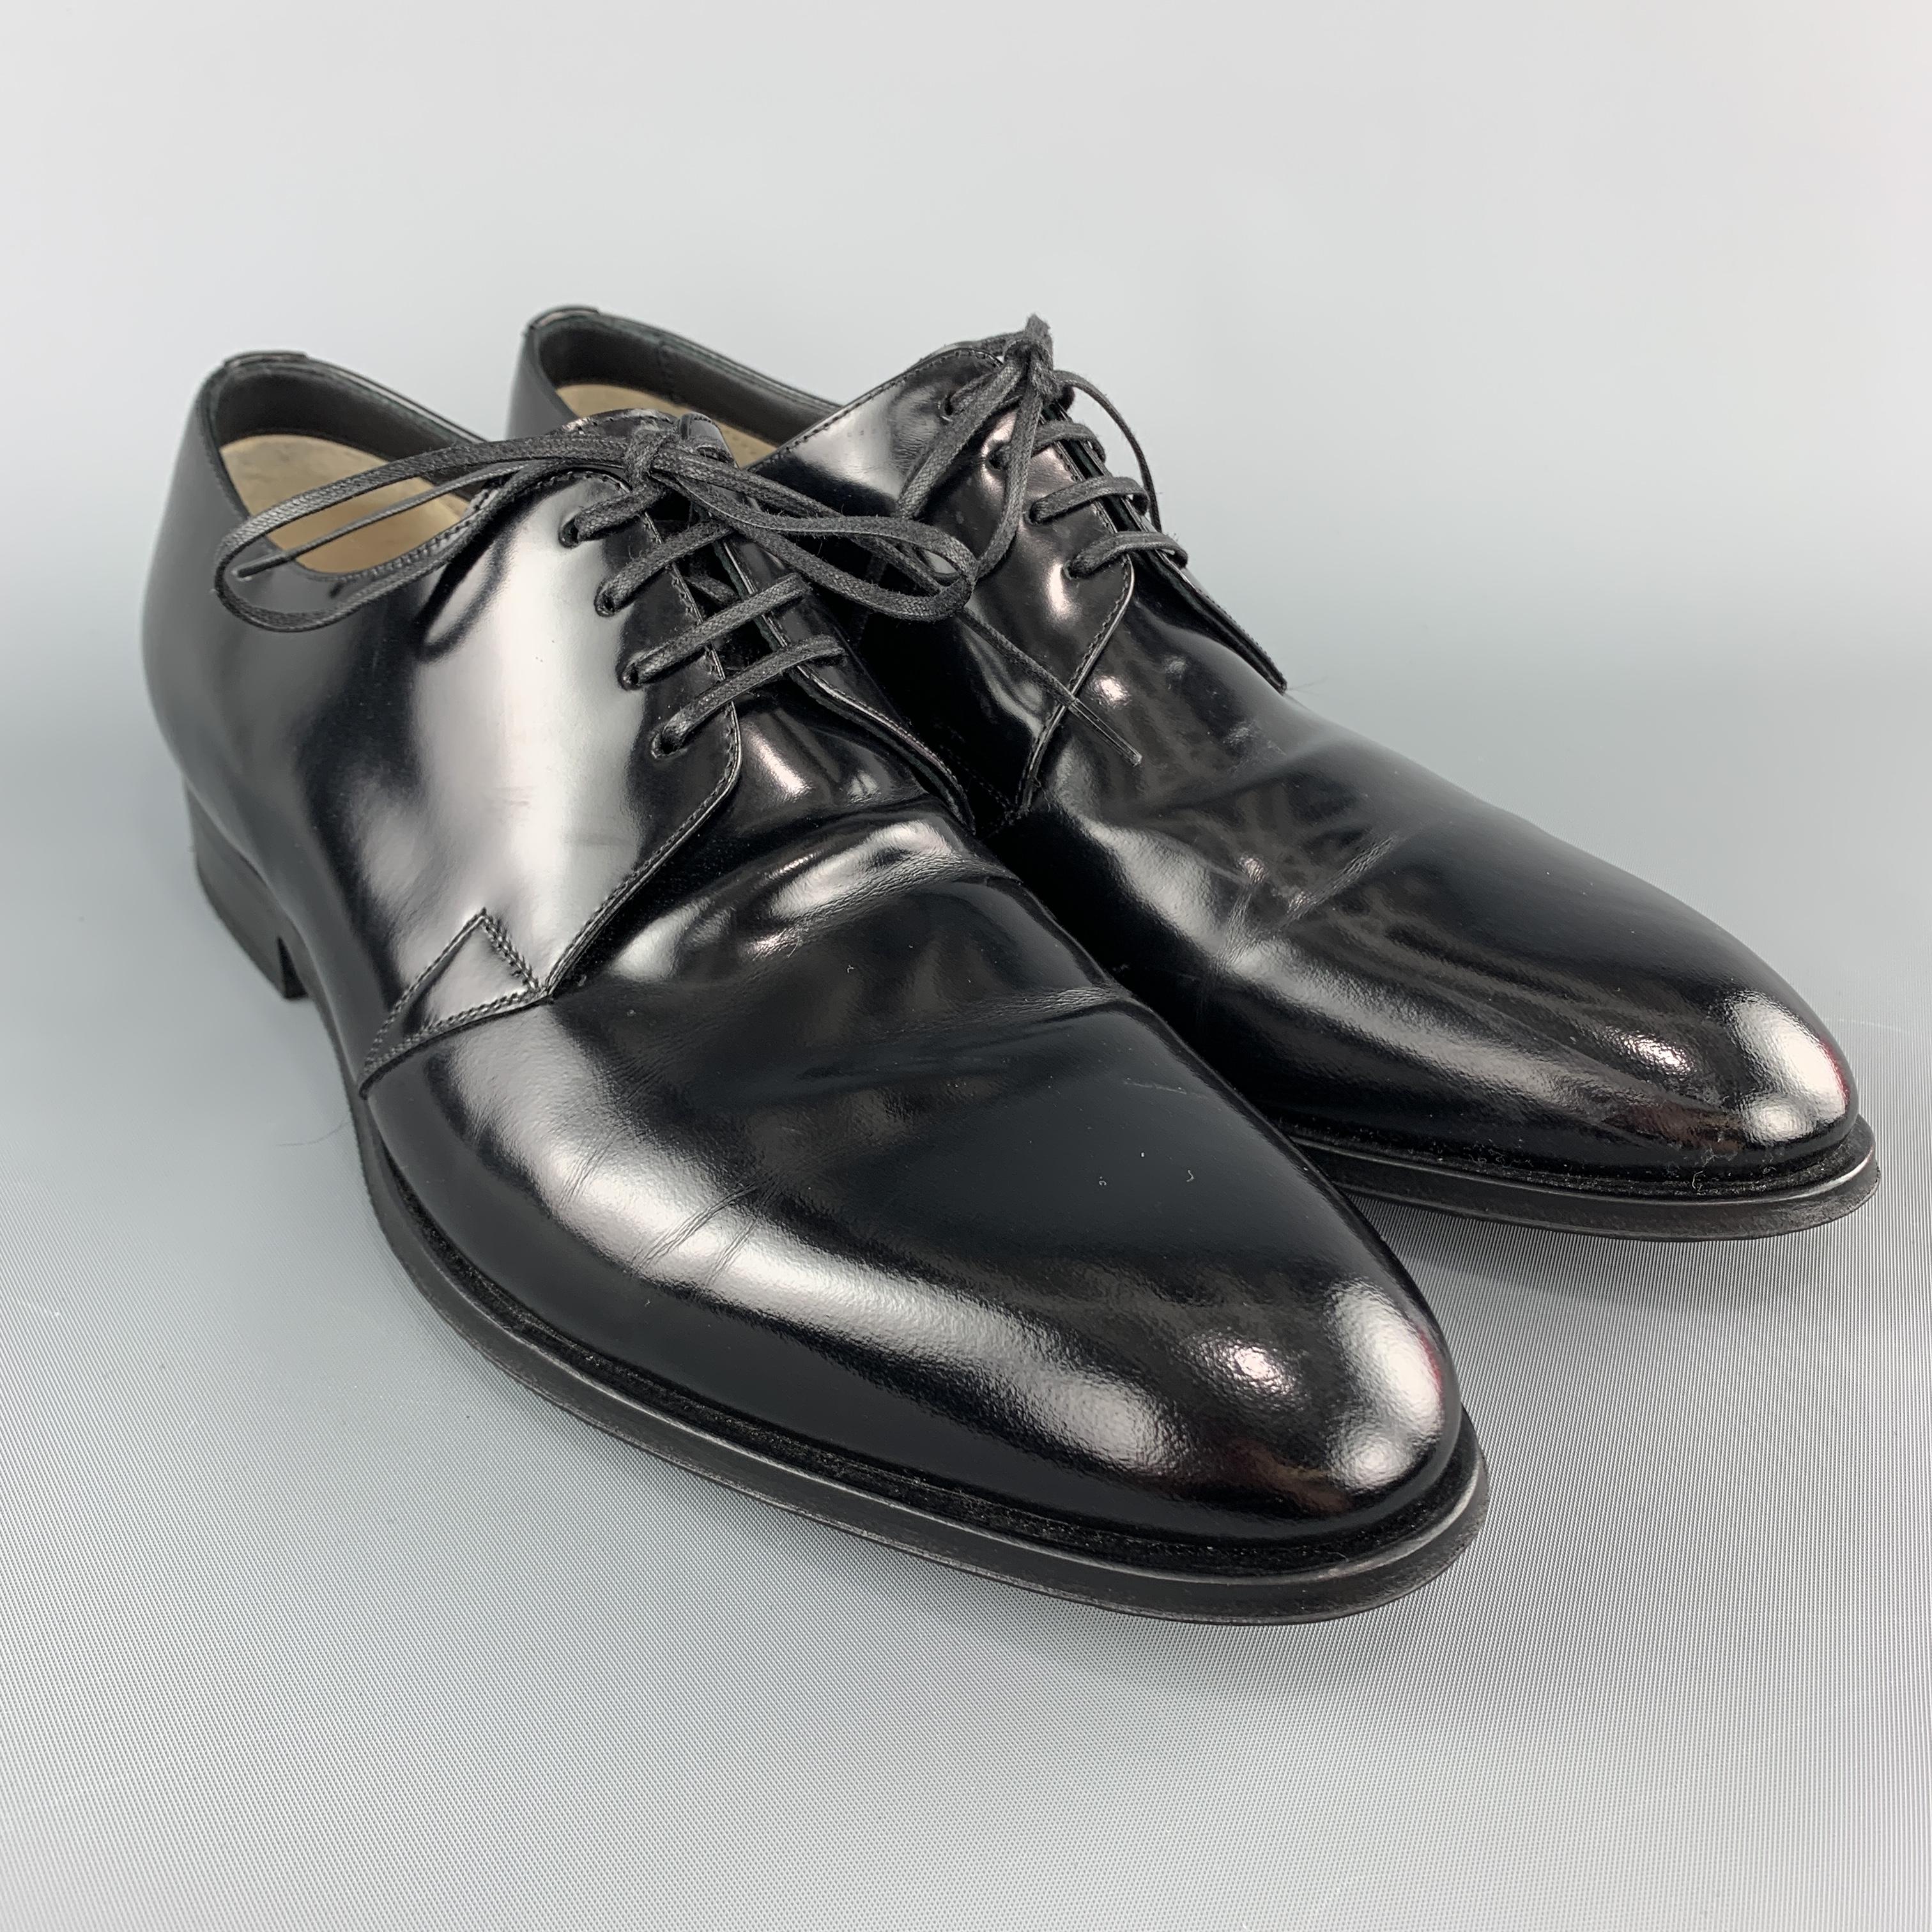 DIOR HOMME derby dress shoes come in black polished leather with a round pointed toe. Made in Italy.

Excellent Pre-Owned Condition.
Marked: IT 41

Outsole: 11.5 x 4 in.